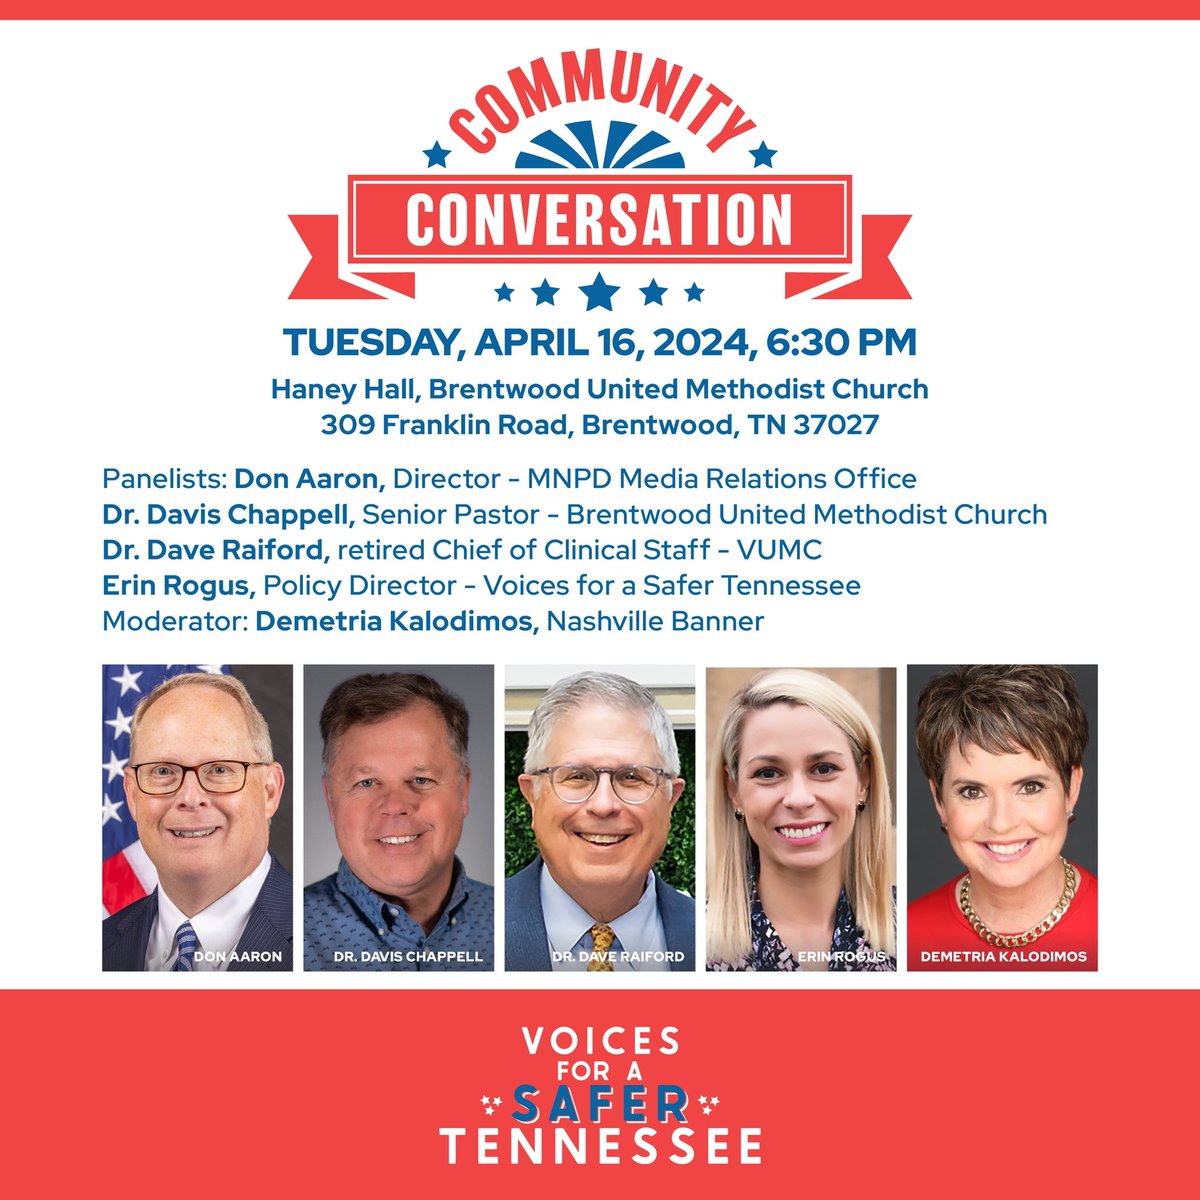 TENNESSEE 🎉🎉Please join us in person or LIVE next Tuesday, April 16th in Brentwood at 6:30 PM CT/ 7:30ET as we hold a Community Conversation at Brentwood United Methodist Church. Together, we are taking steps towards a #SaferTN. Register here: safertn.org/events/